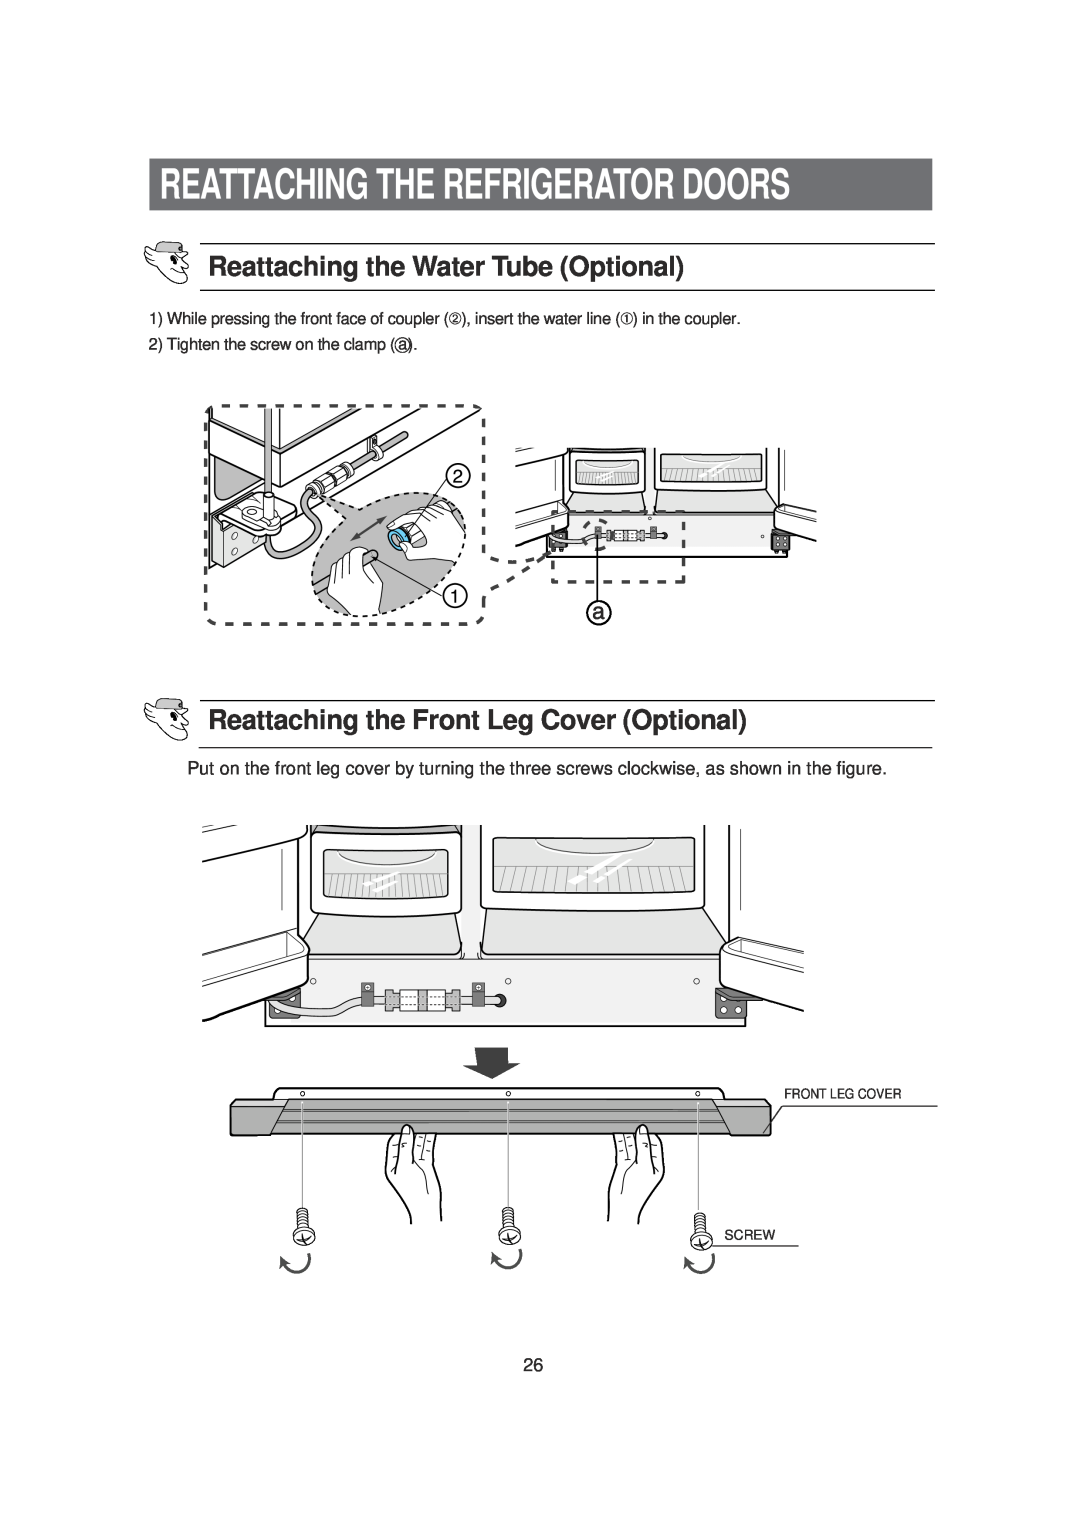 Samsung SRS620DW Reattaching the Water Tube Optional, Reattaching the Front Leg Cover Optional, Front Leg Cover Screw 